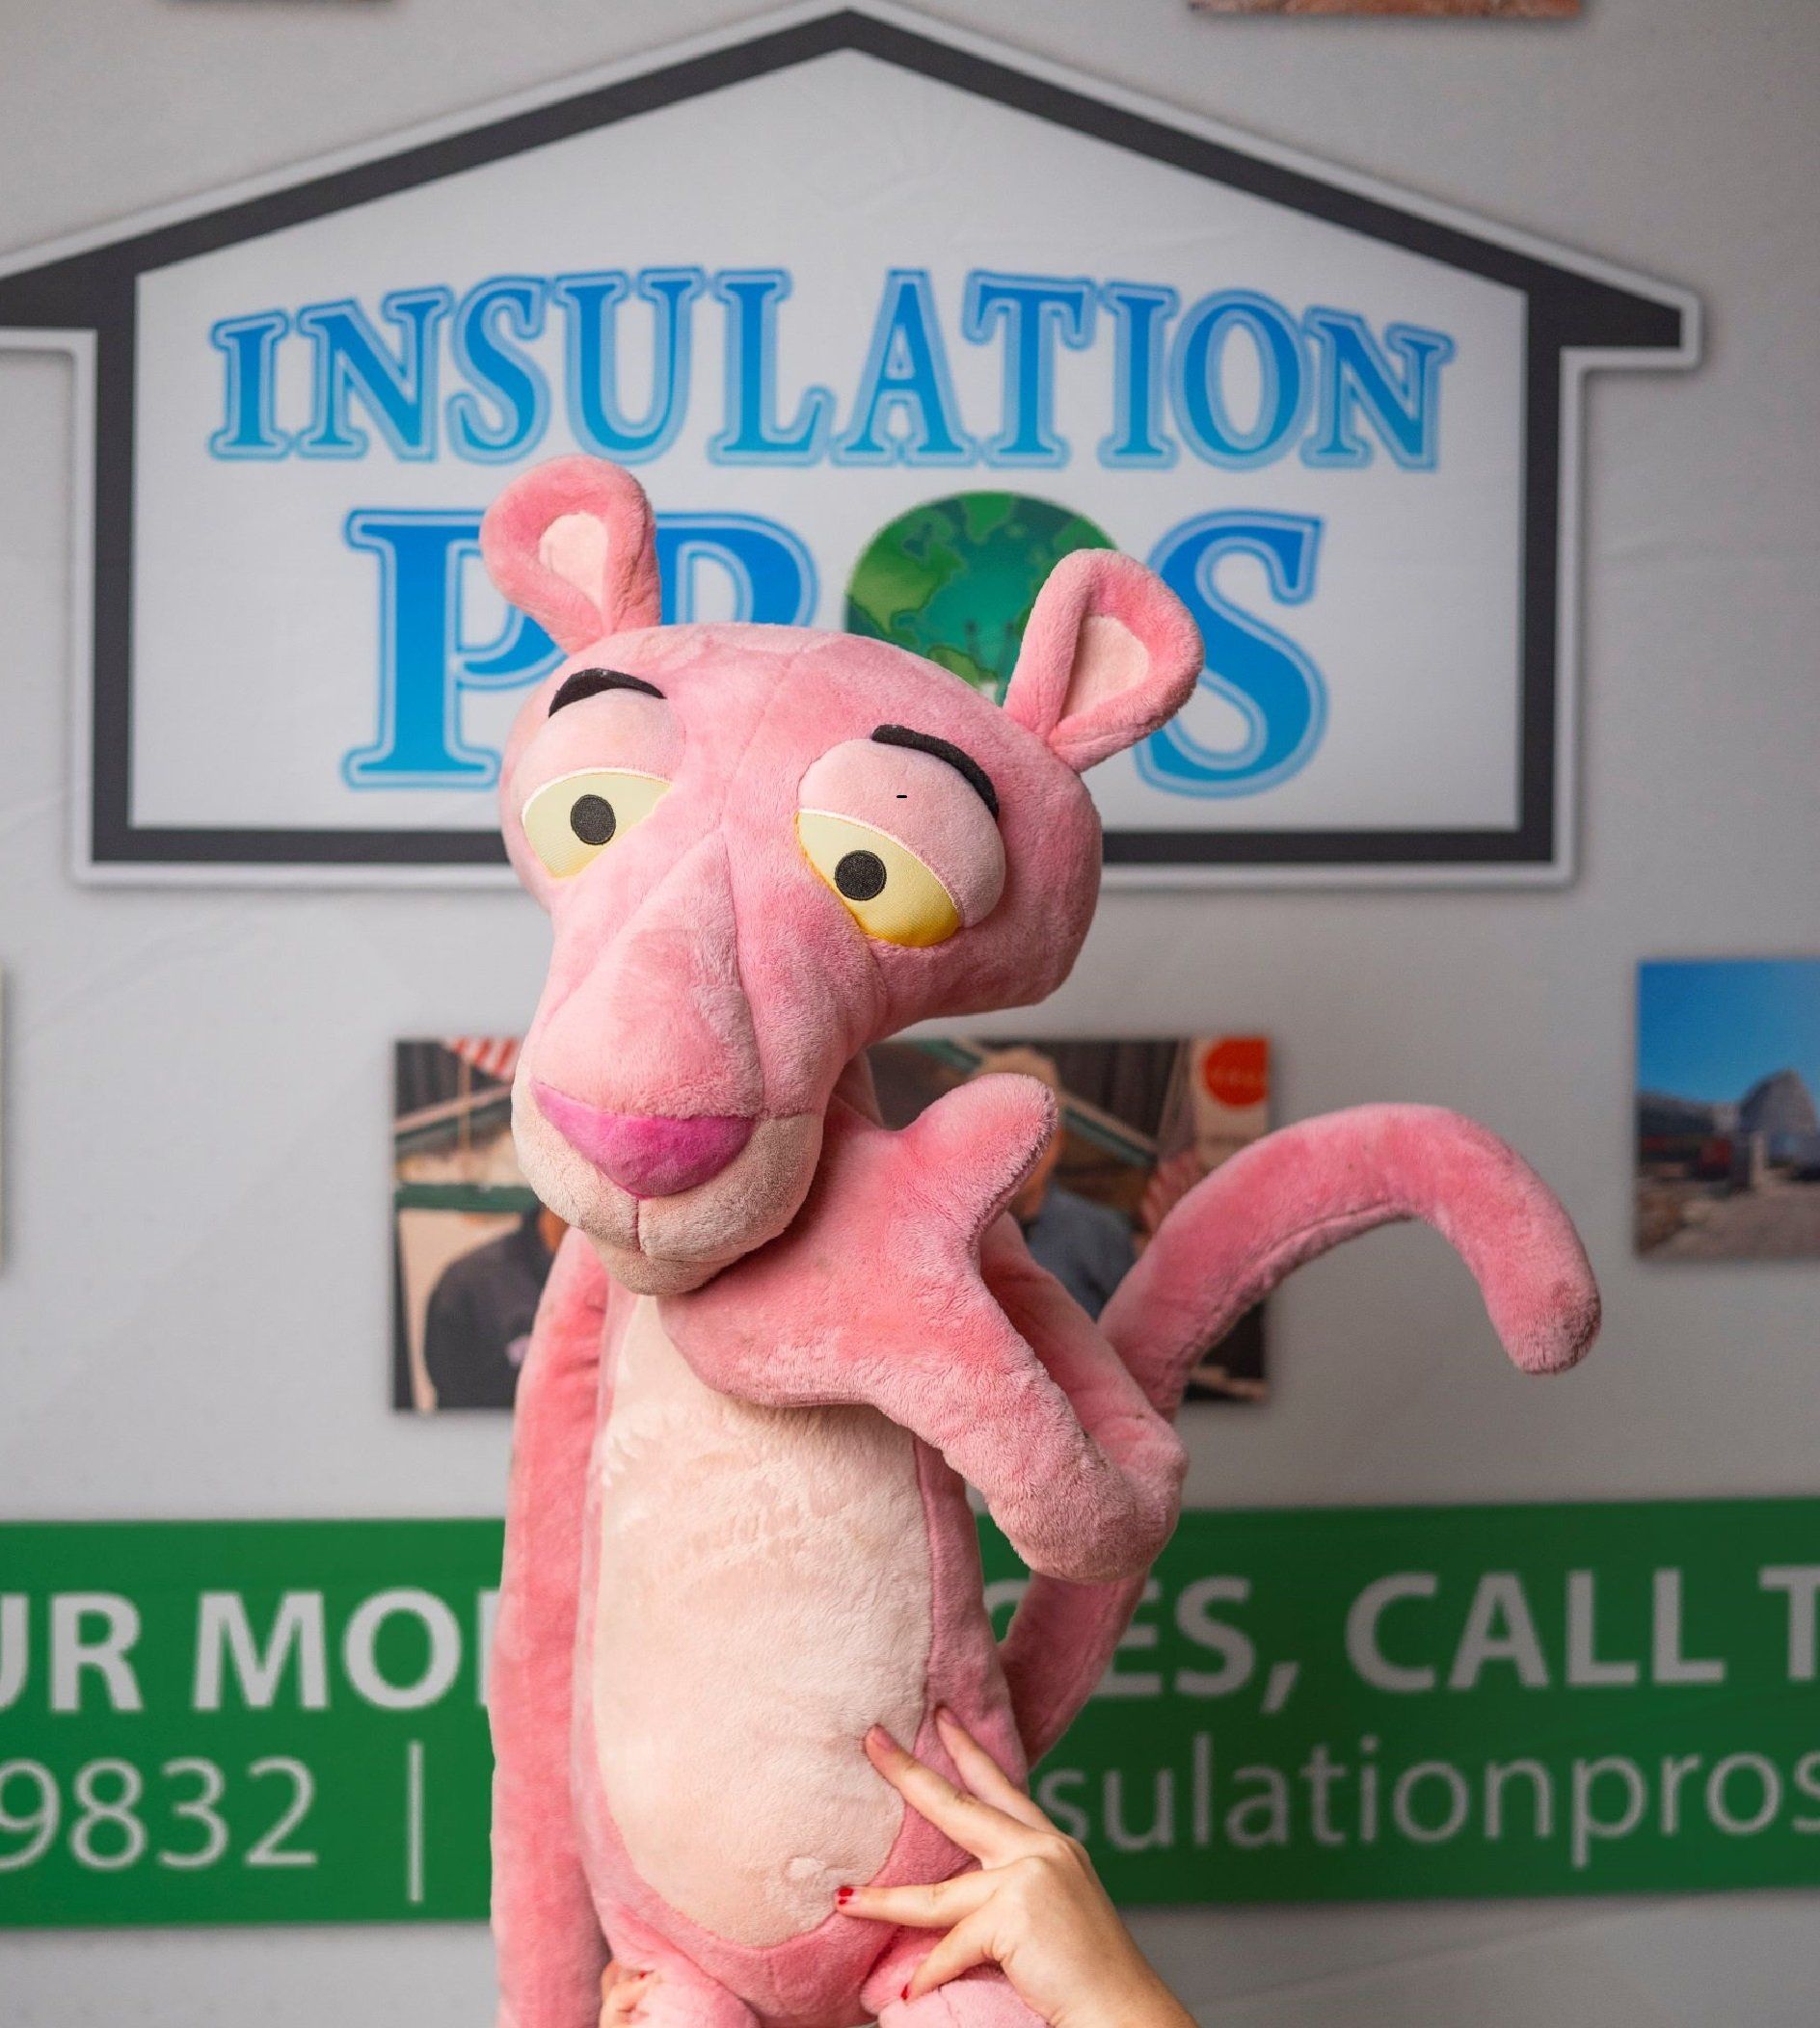 A person holding a stuffed pink panther in front of a sign that says insulation pros